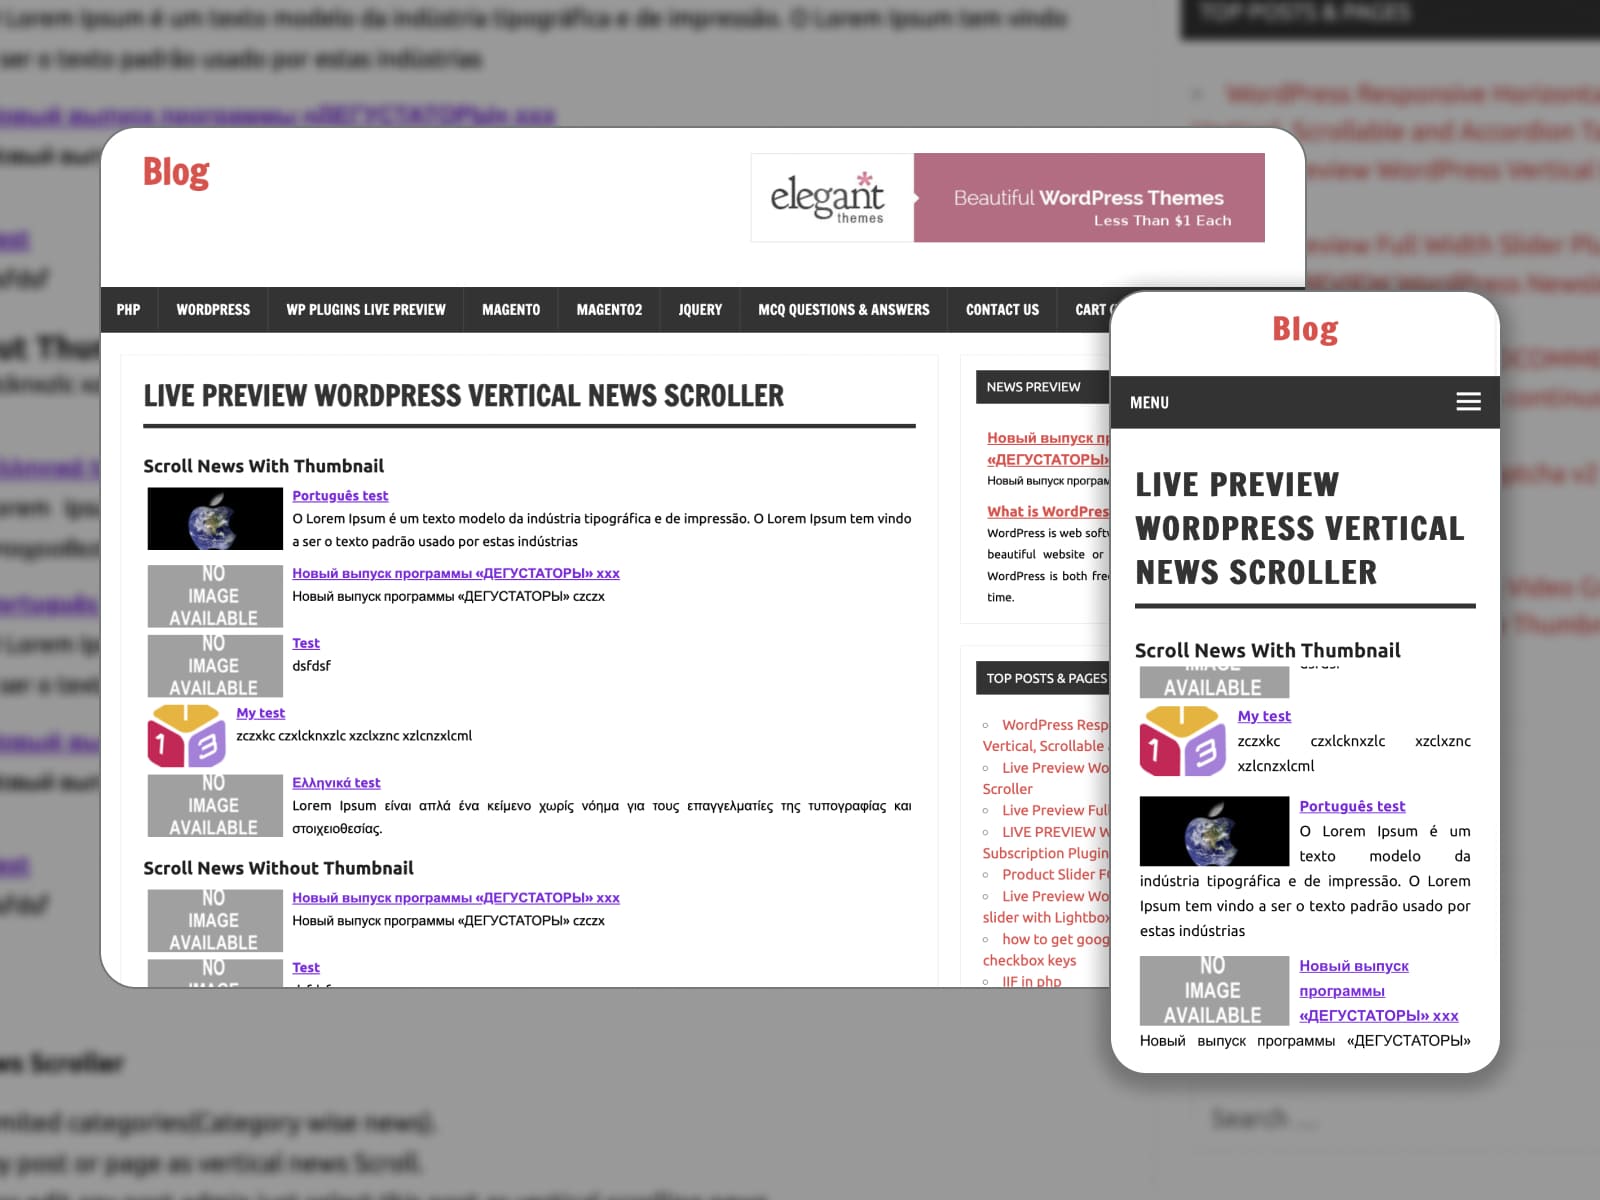 Live Preview page of the WordPress Vertical News Scroller plugin.